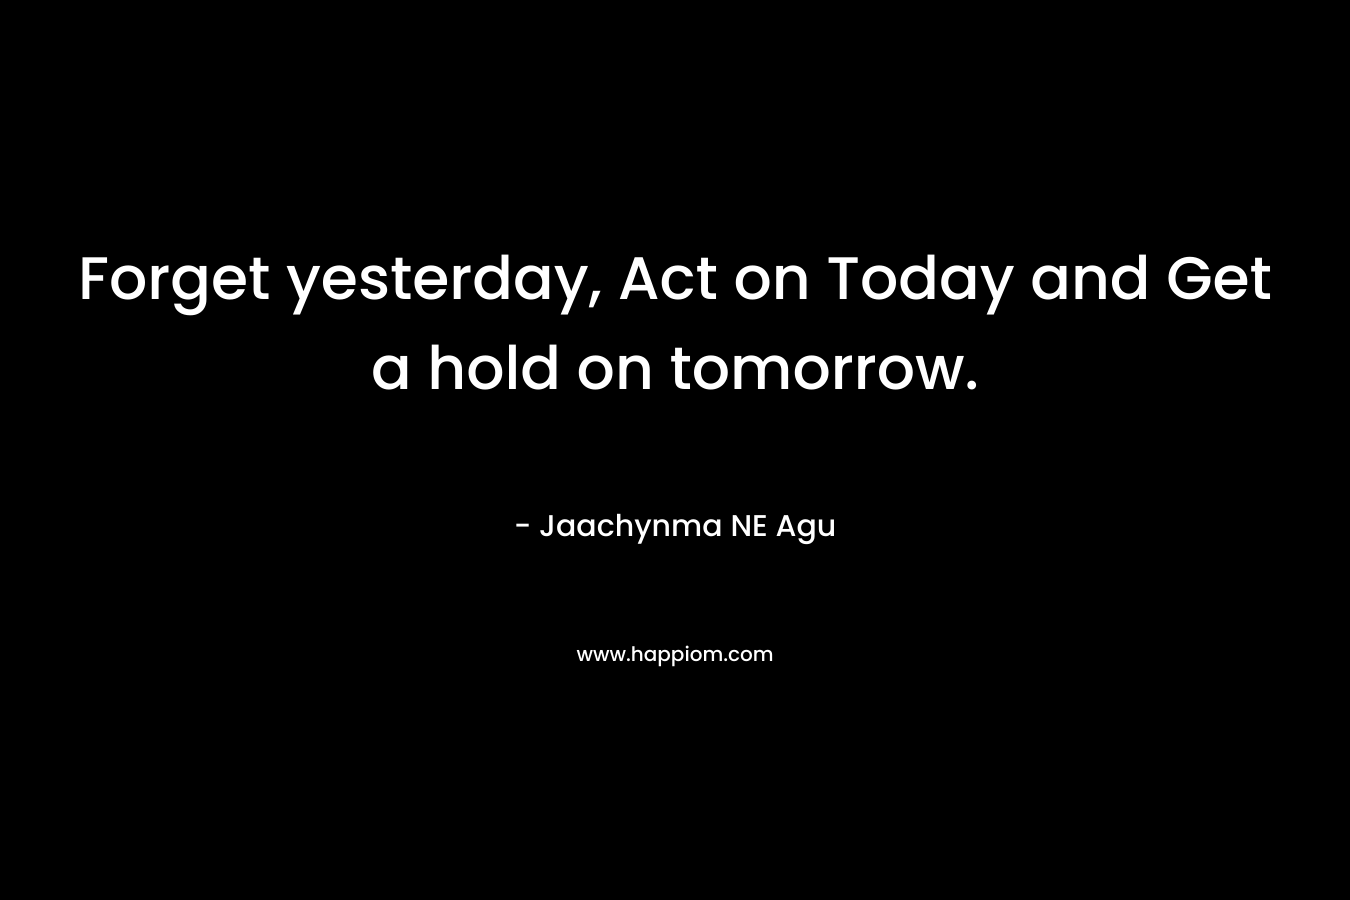 Forget yesterday, Act on Today and Get a hold on tomorrow.